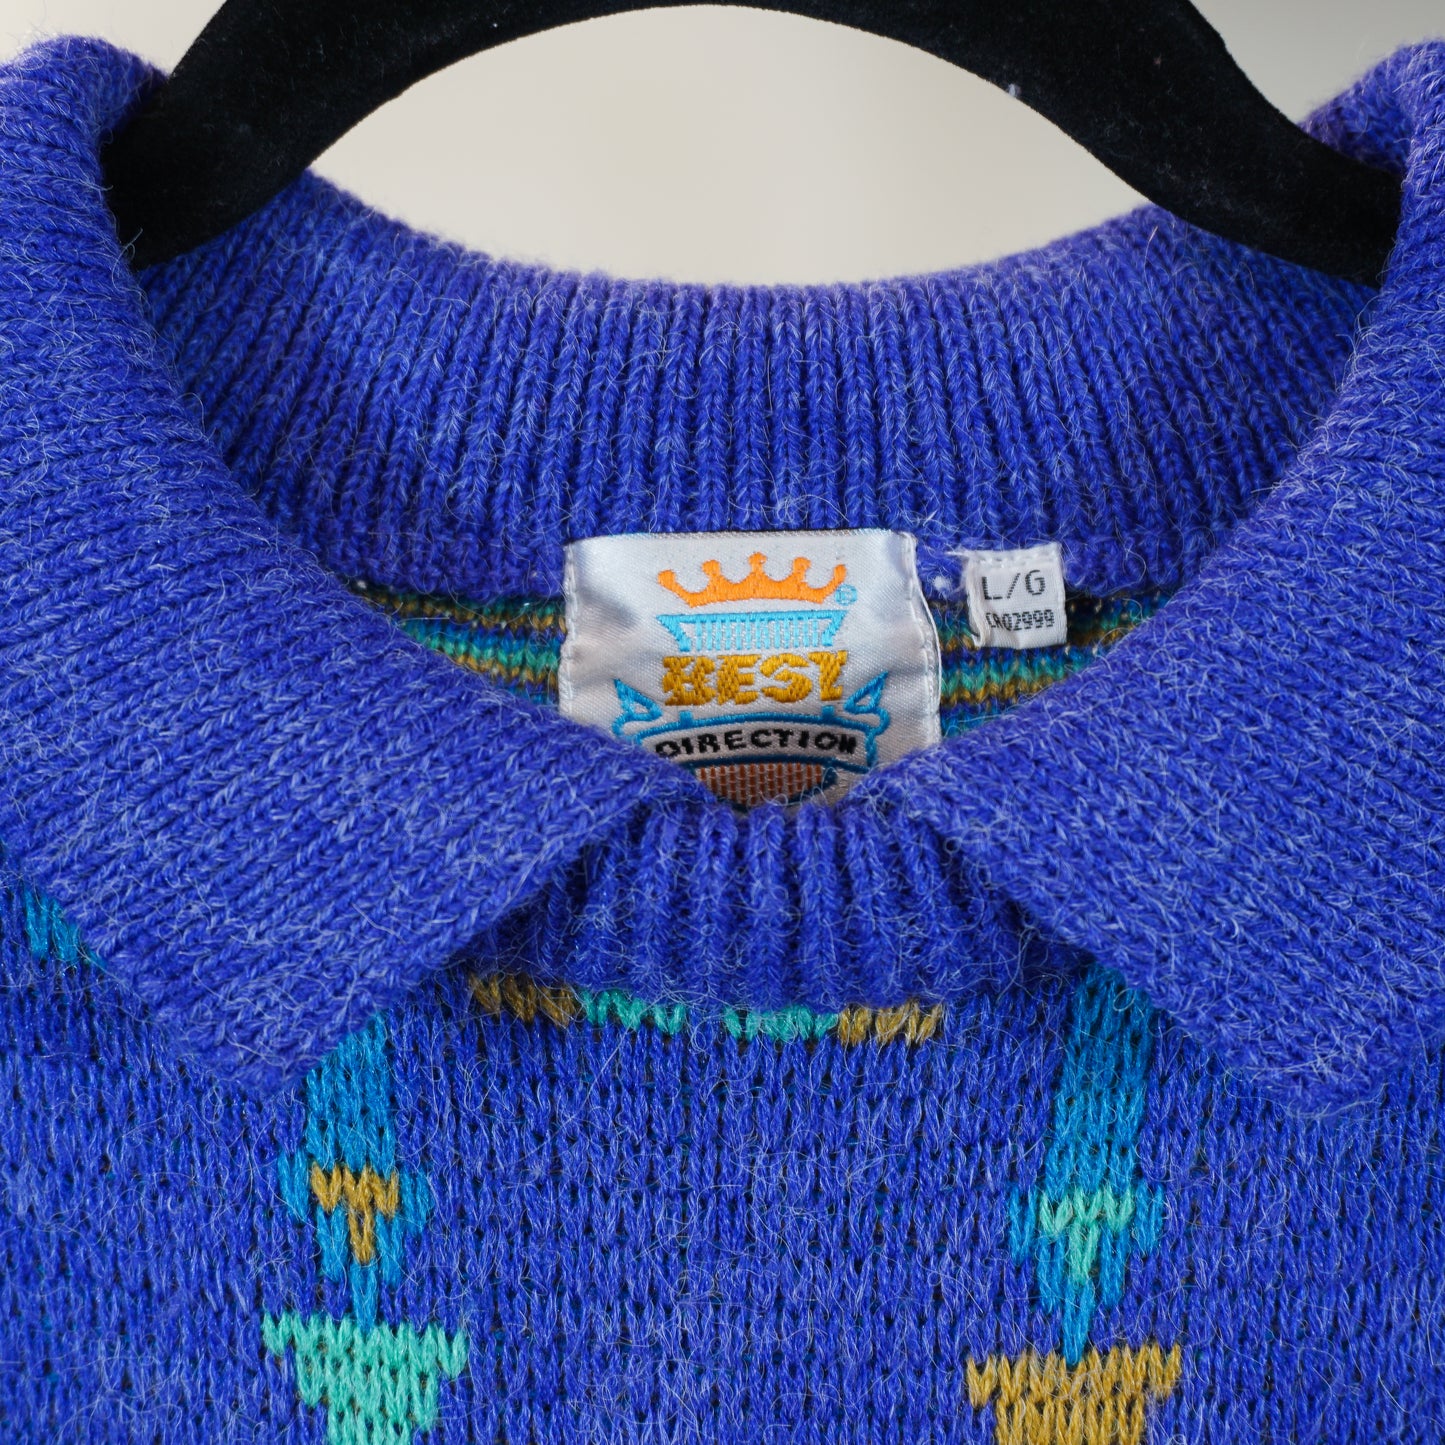 80s/90s 'Best Direction' Collared Knit Patterned Sweater (L/XL)